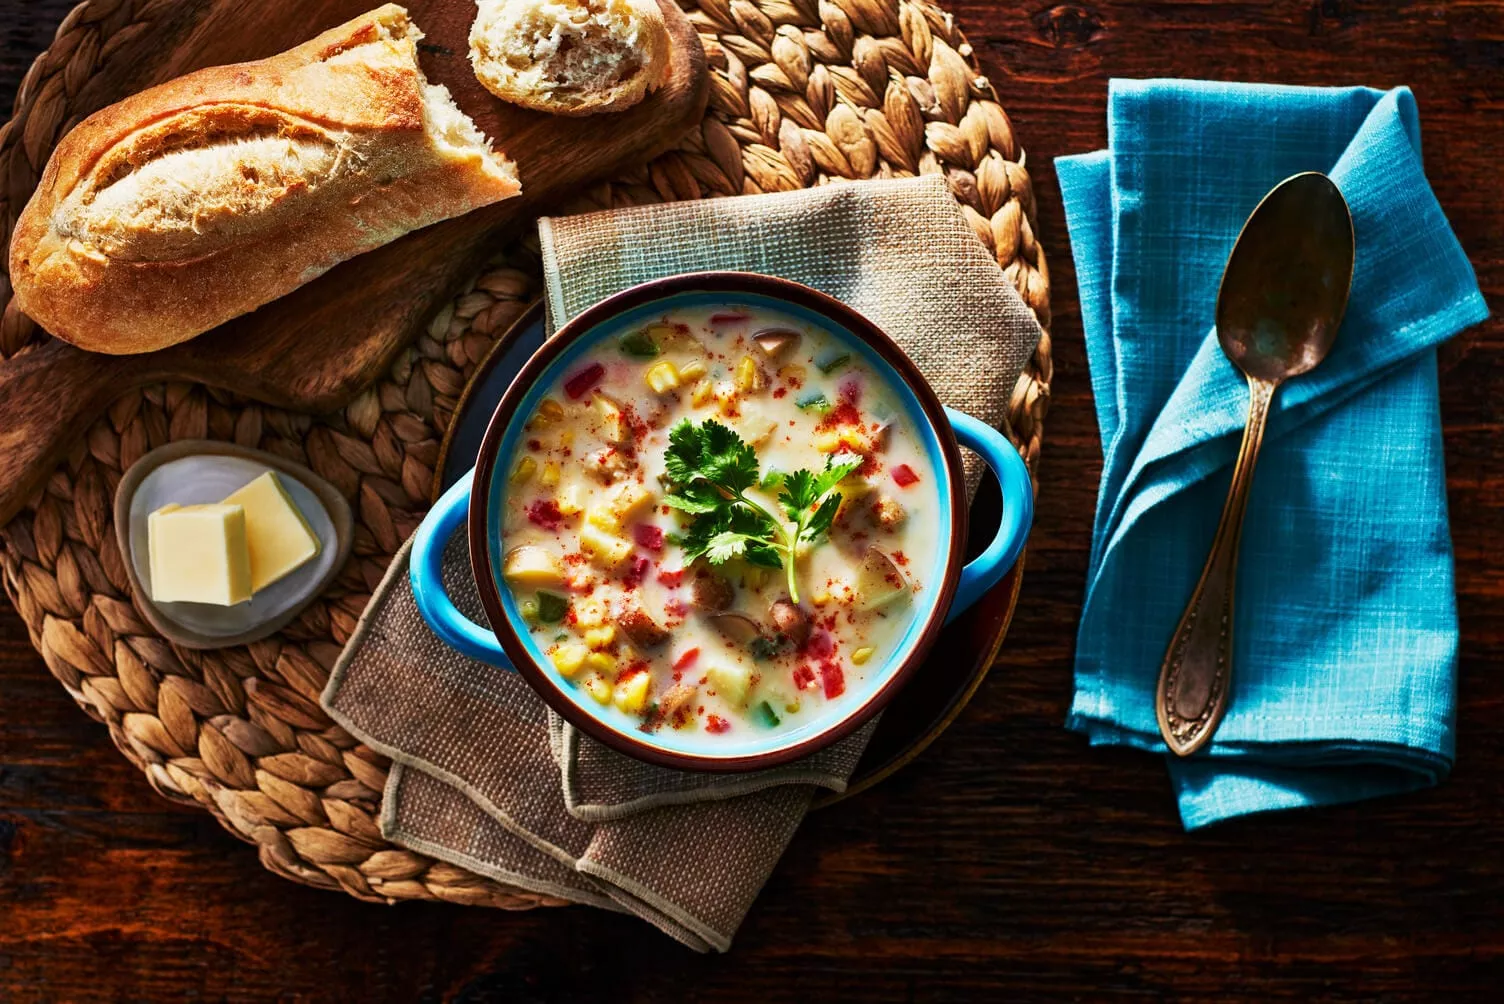 A bowl of potato and corn chowder with some butter and crusty bread nearby.